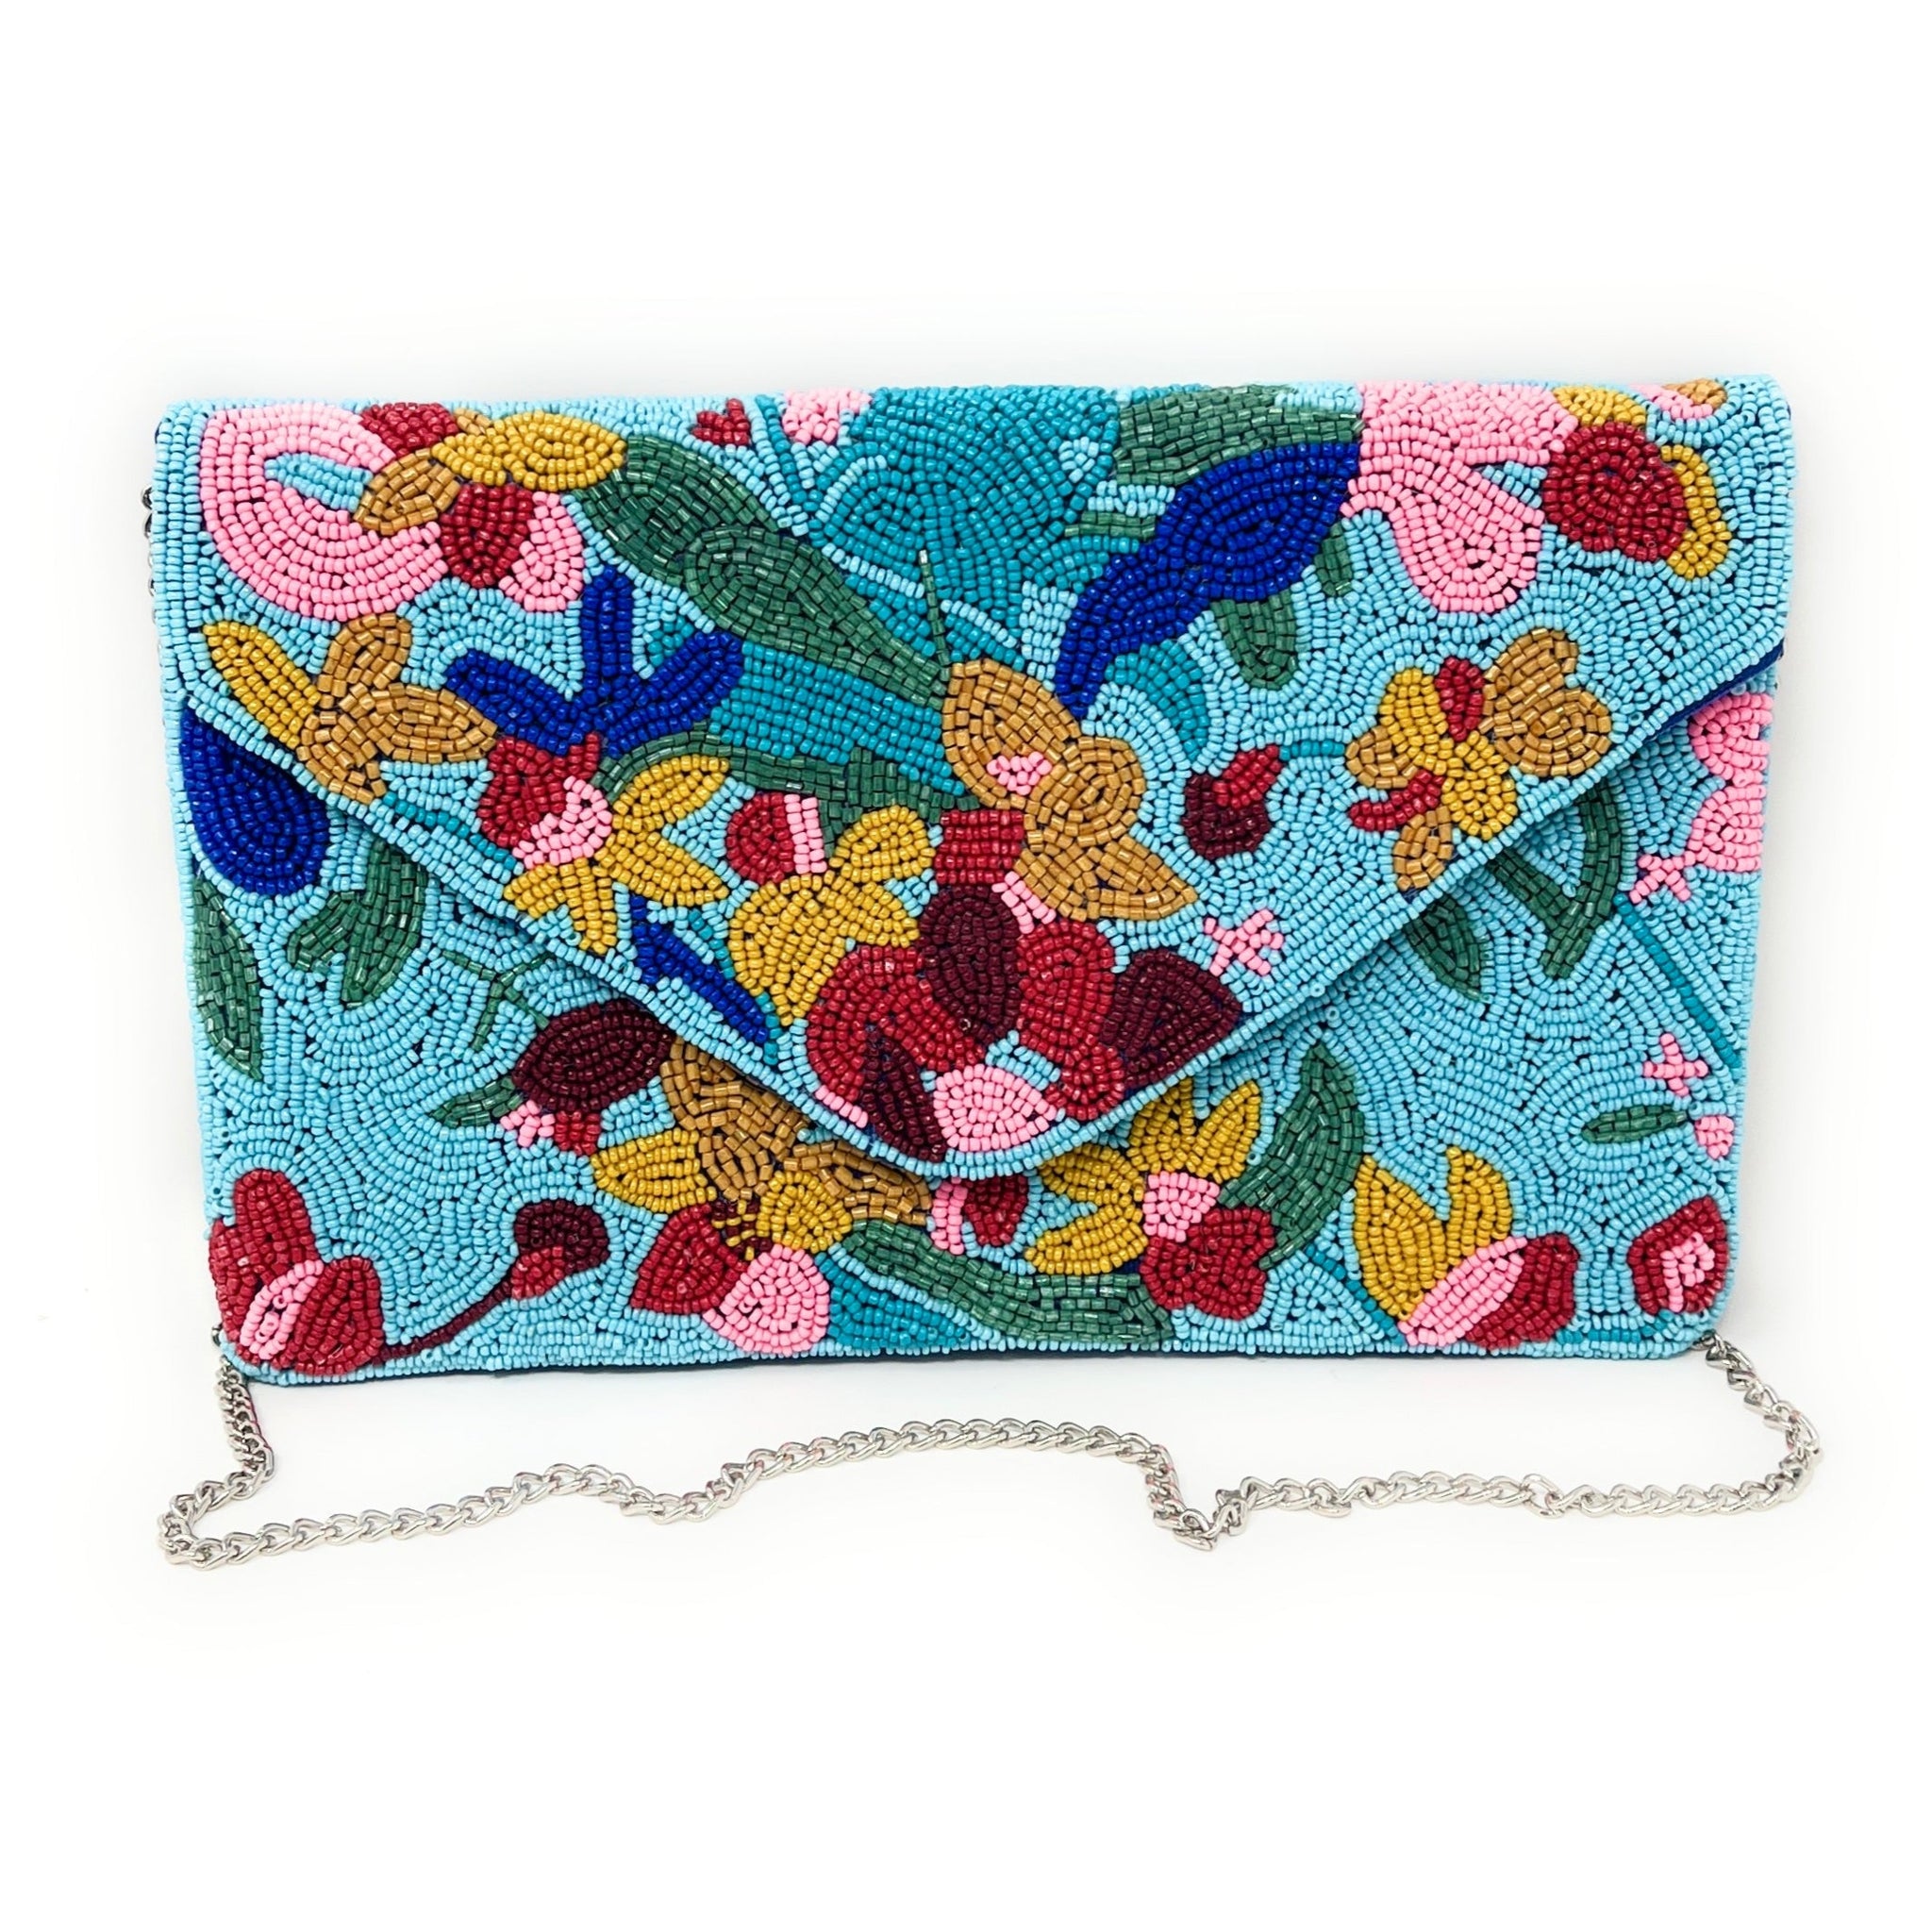 Hand Embroidered Embroidery Clutch Purse - Thecraftroot